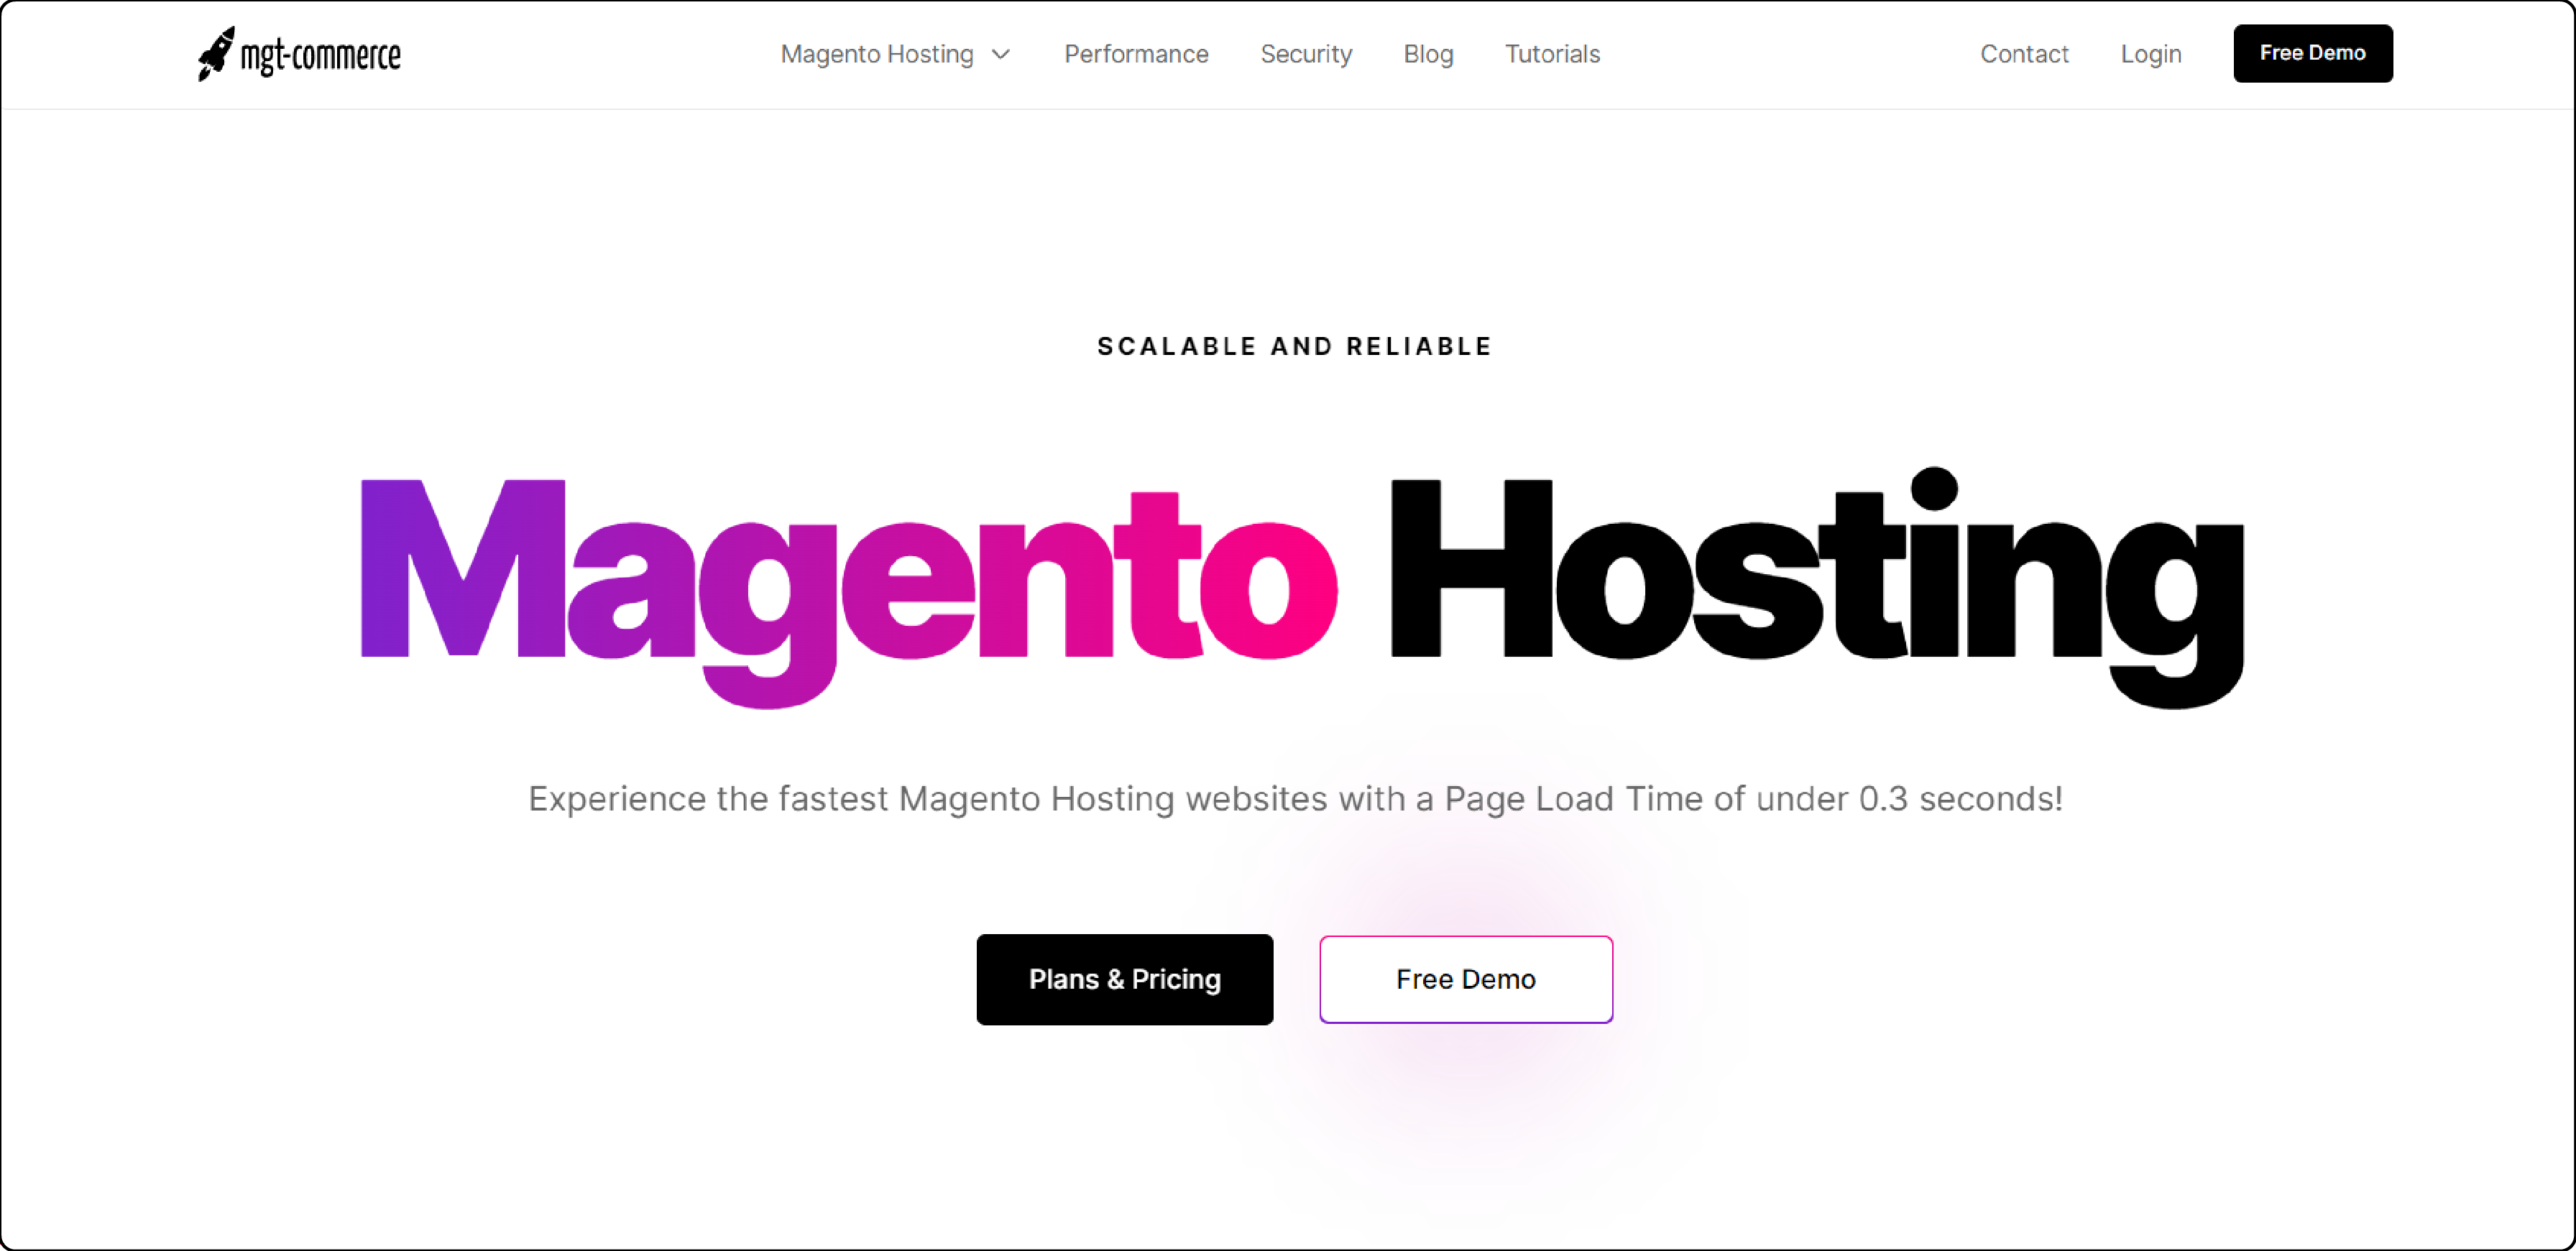 MGT-Commerce as Top Magento Hosting Provider